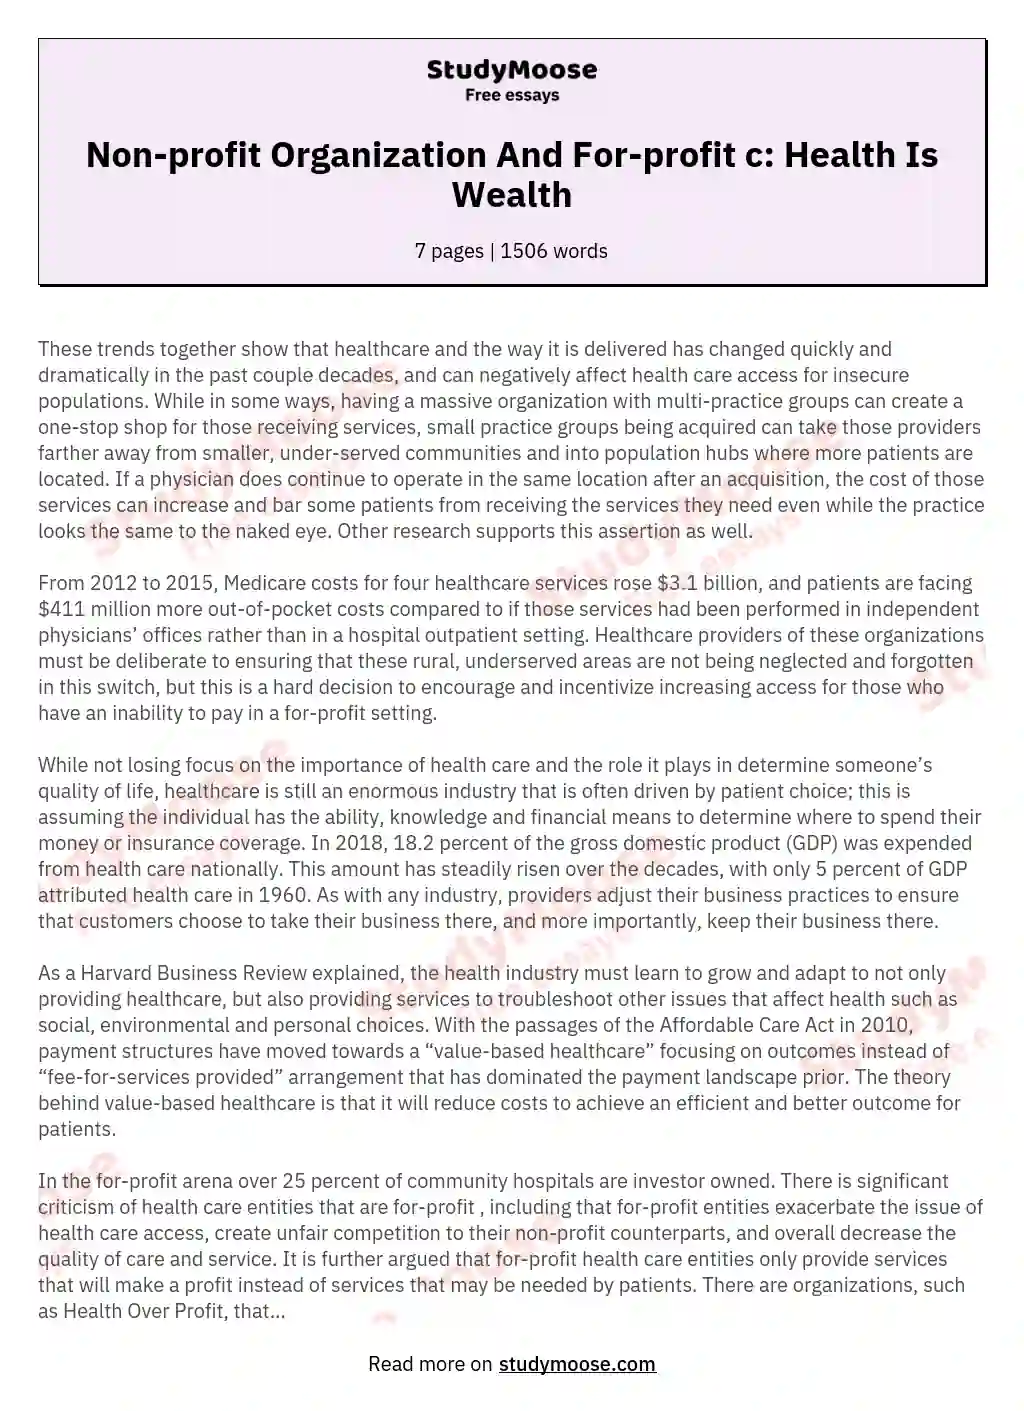 Non-profit Organization And For-profit c: Health Is Wealth essay